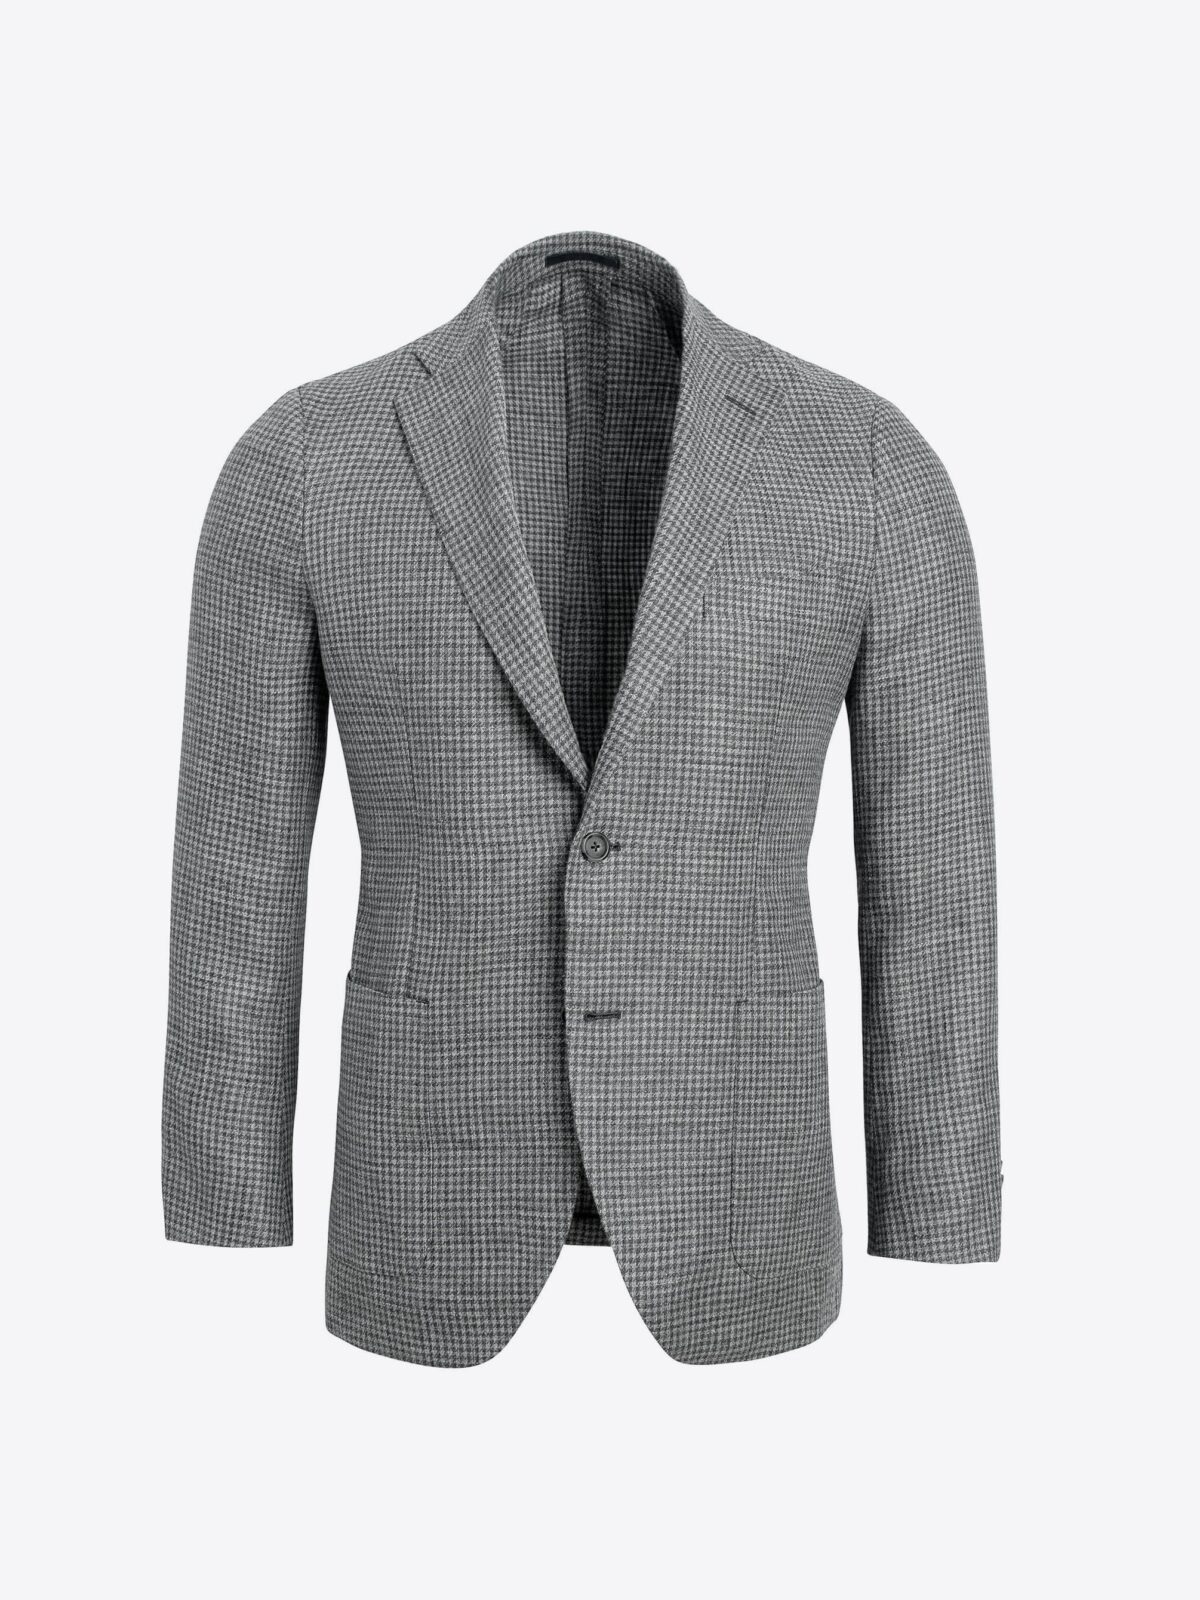 Bedford Grey Houndstooth Linen and Wool Jacket